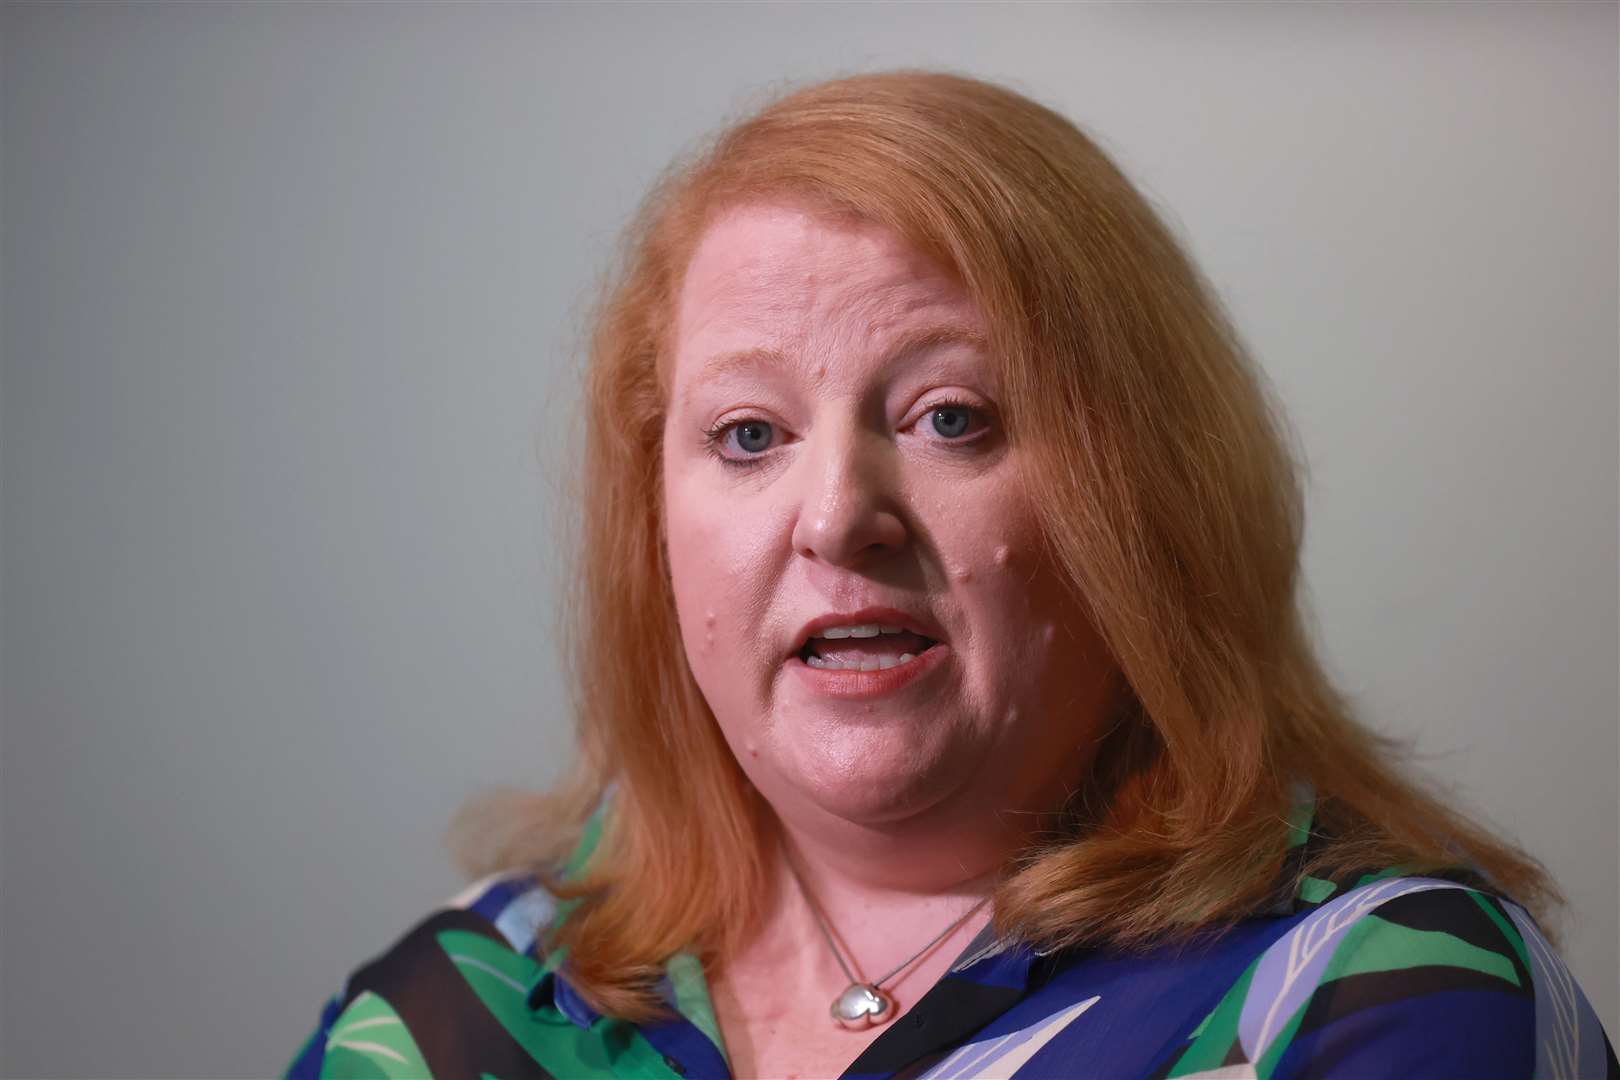 Alliance Party leader Naomi Long said the British and Irish governments should enable the return of Stormont if the DUP will not return to the Assembly (Liam McBurney/PA)